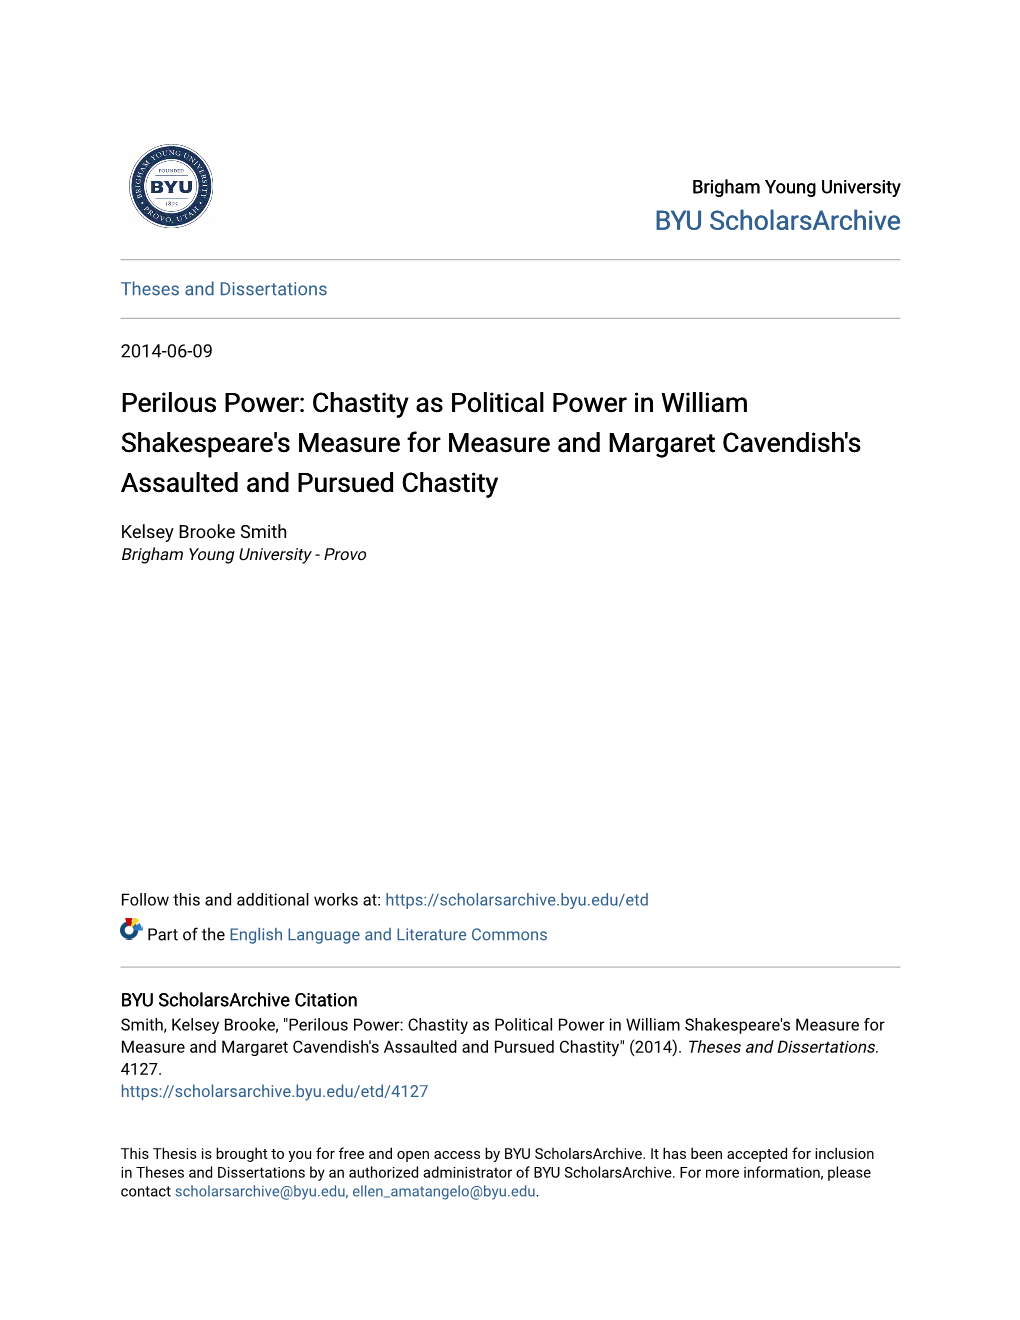 Chastity As Political Power in William Shakespeare's Measure for Measure and Margaret Cavendish's Assaulted and Pursued Chastity